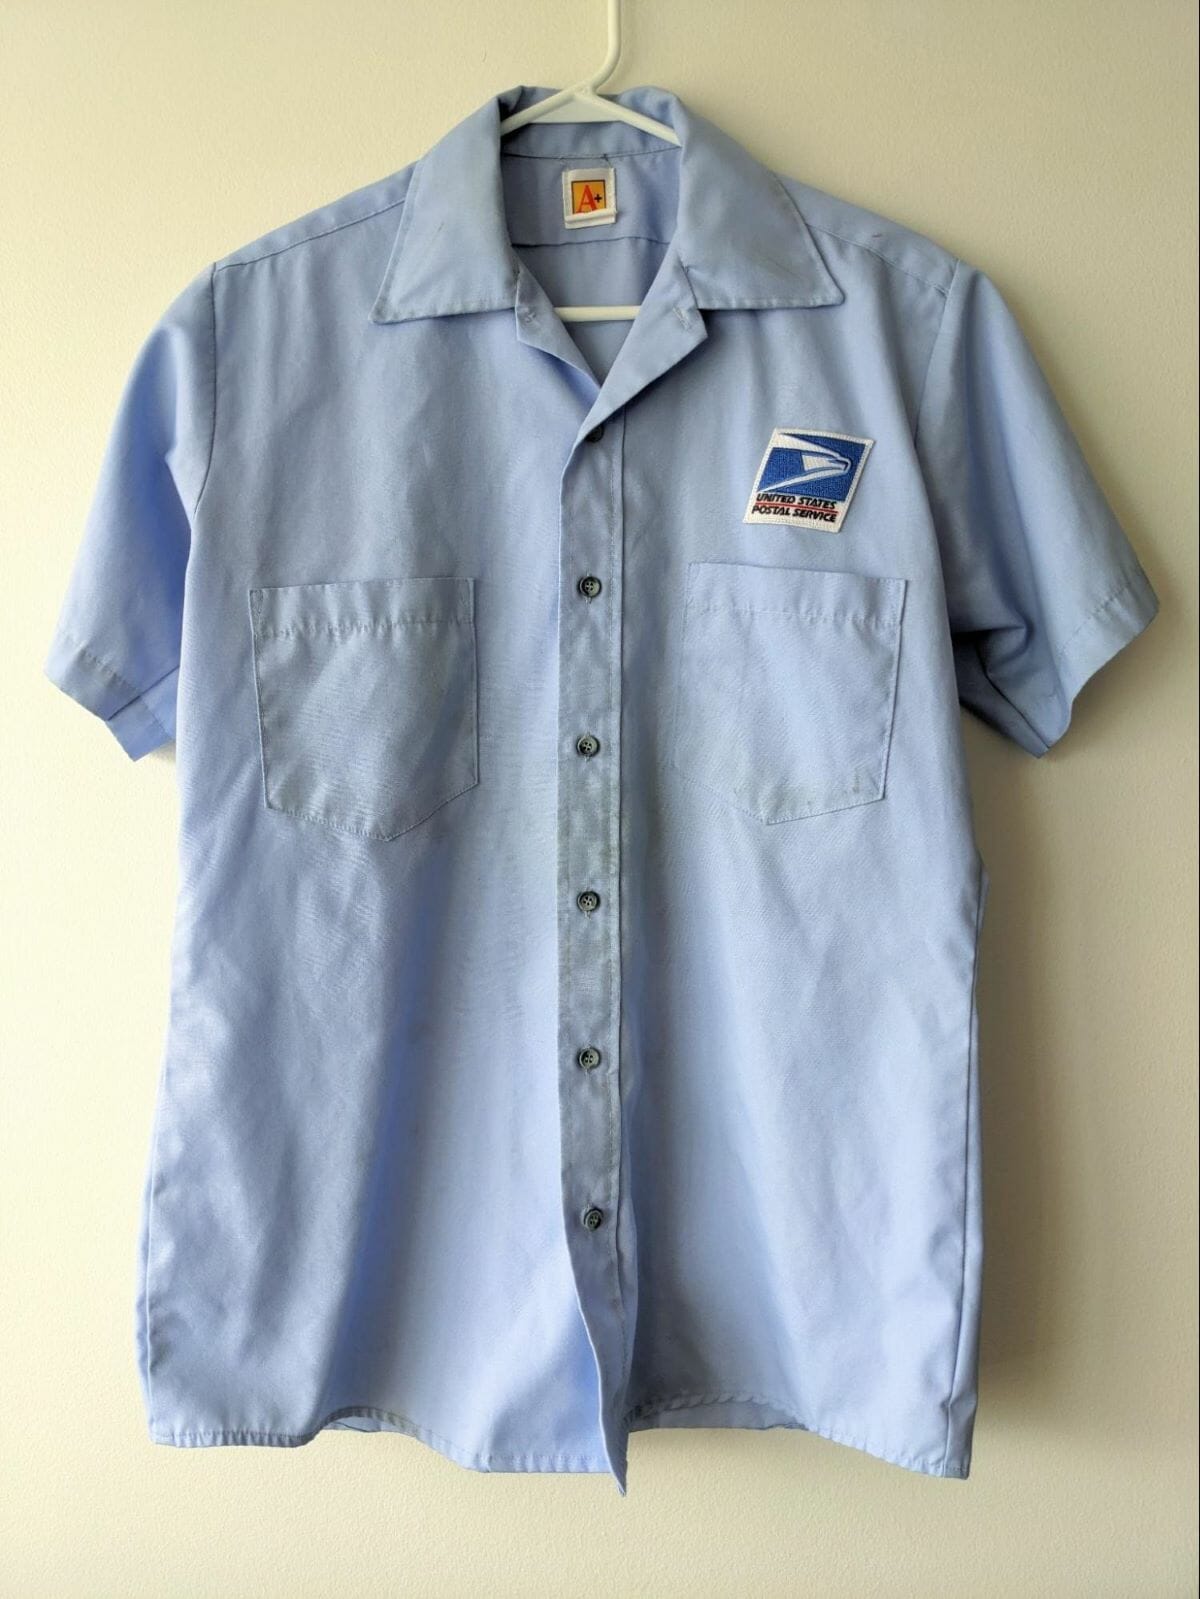 clean usps shirt washed with earth breeze laundry detergent eco sheets